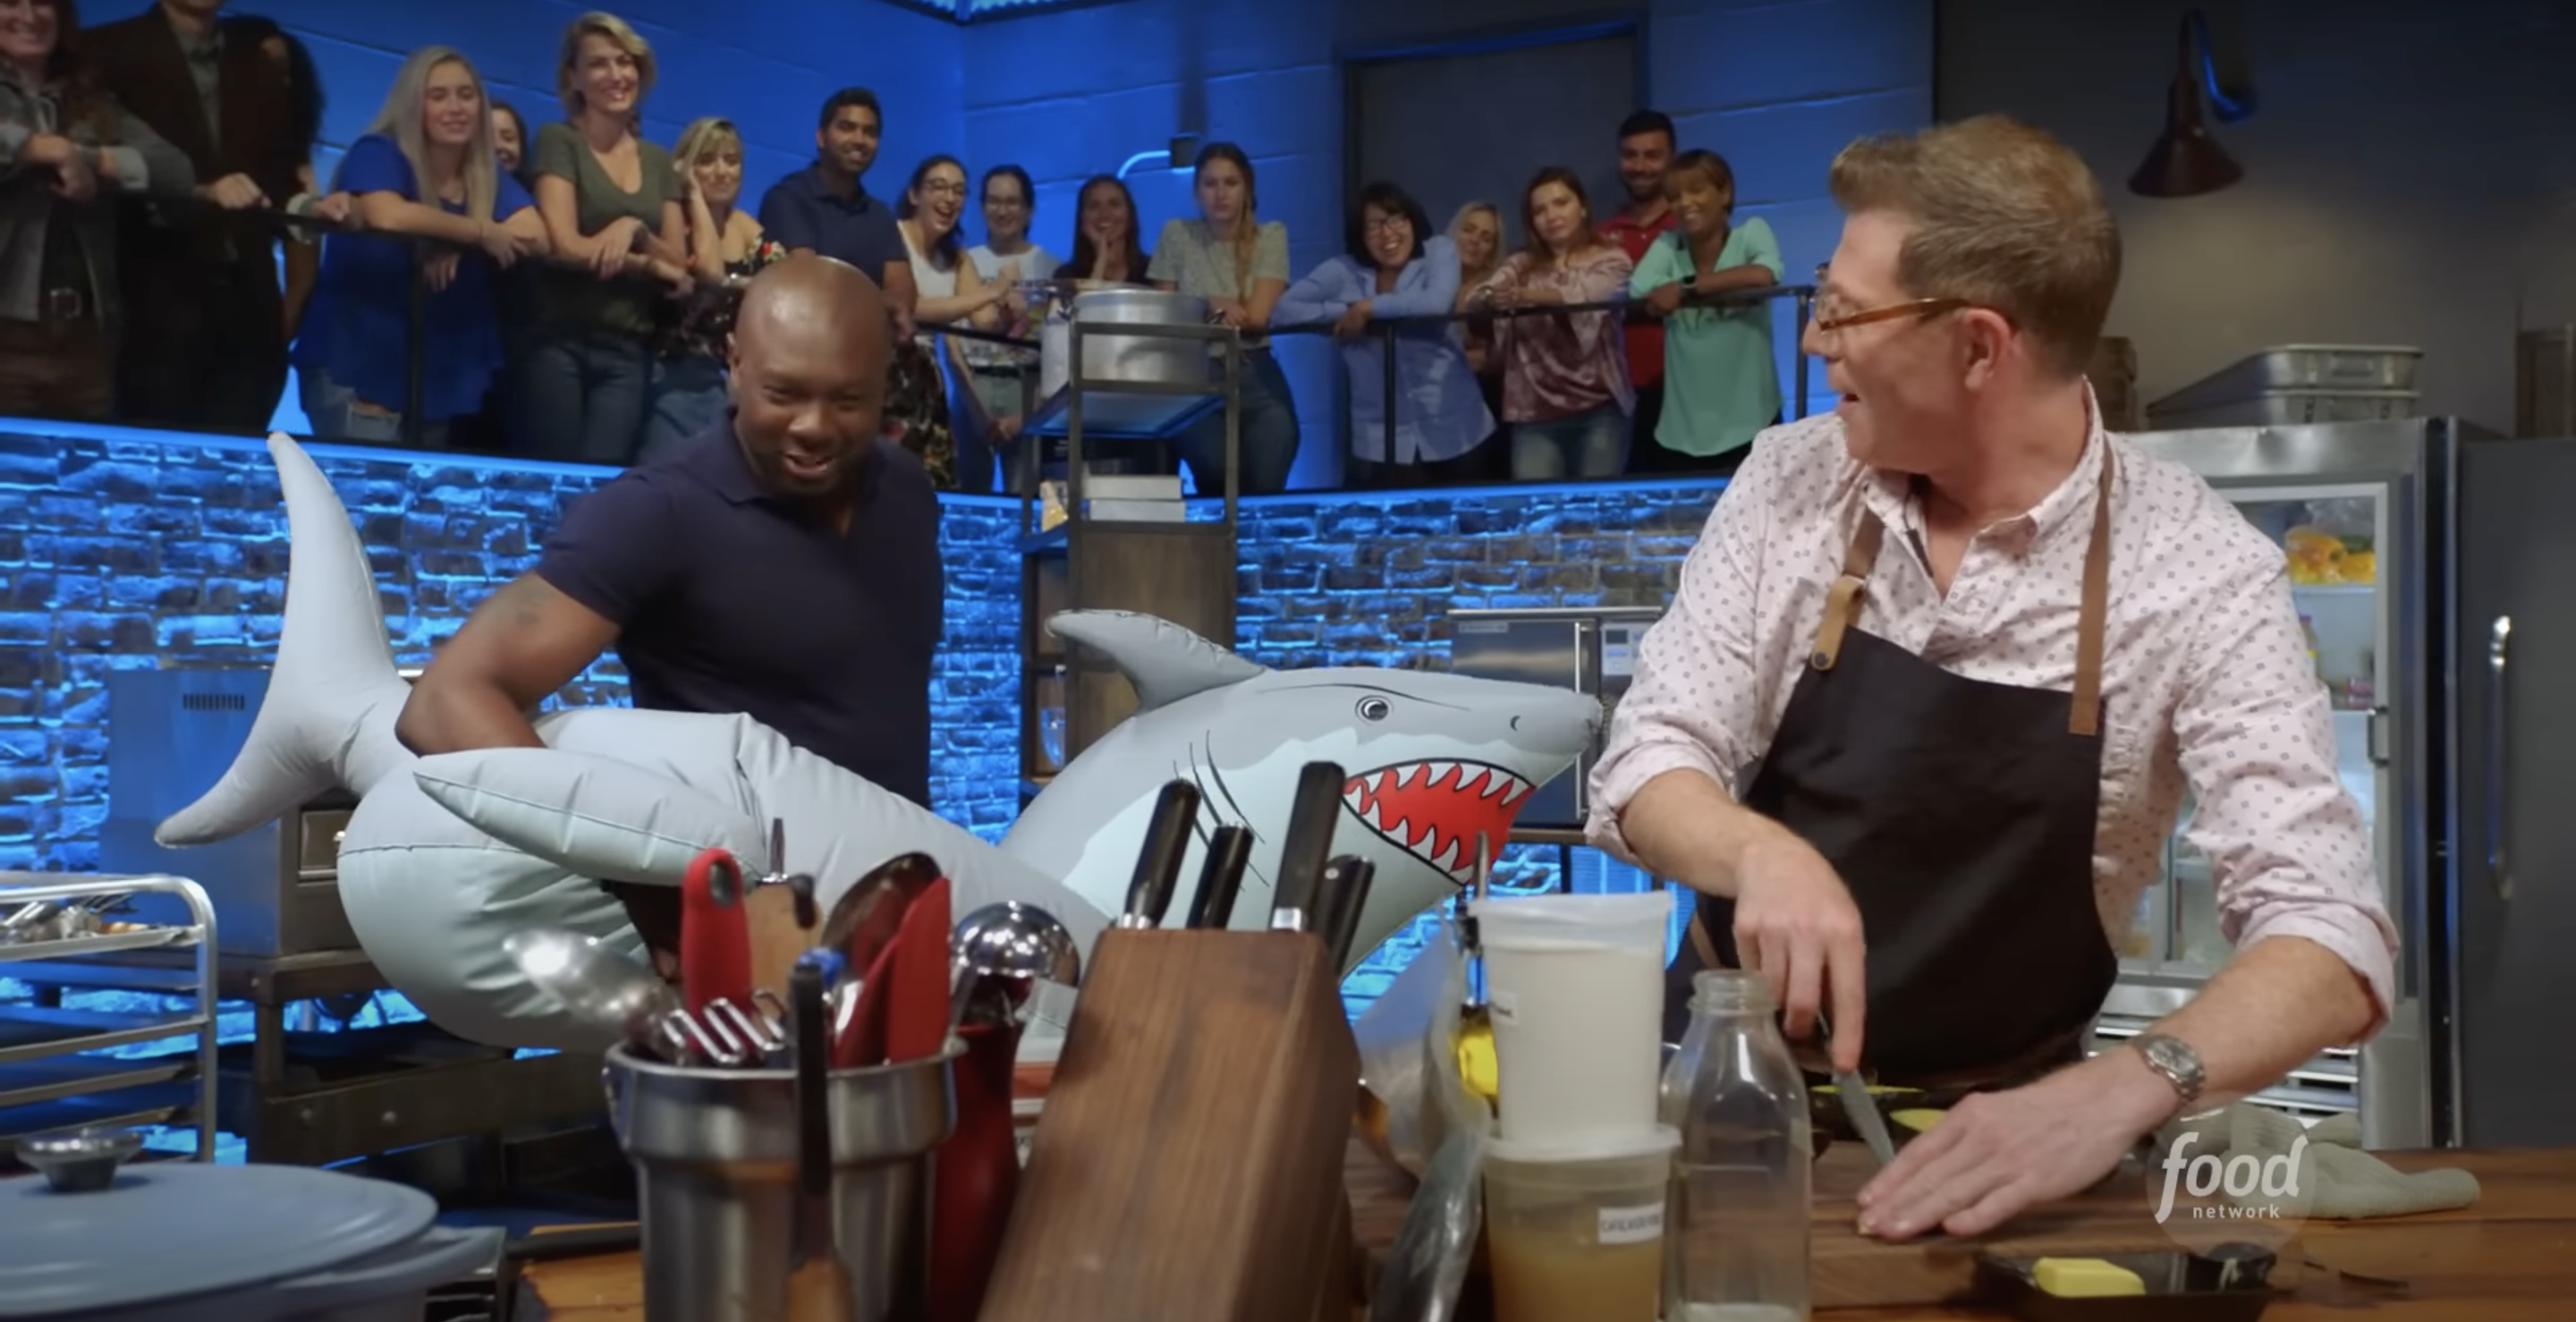 Two chefs in an animated kitchen competition with a shark-themed setup